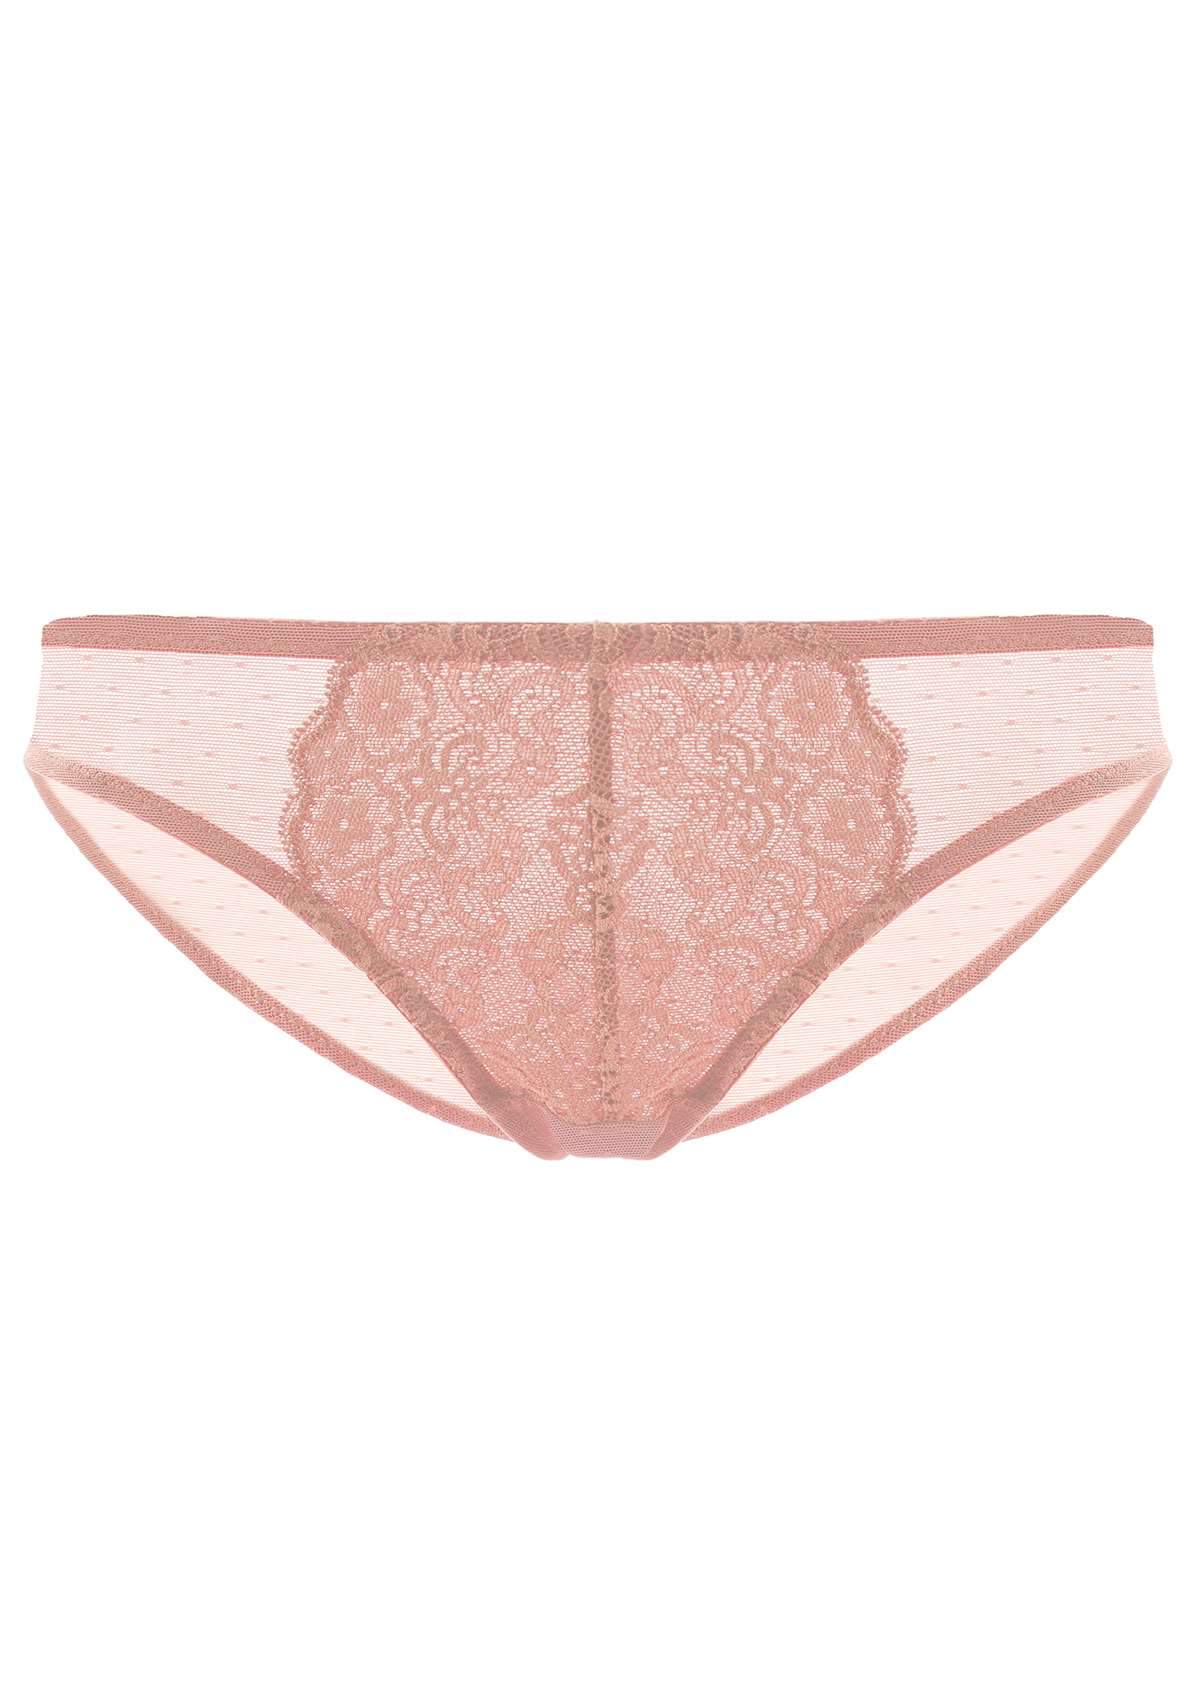 HSIA Nymphaea Front Floral Lace Mesh Back Comfort Bikini Underwear - S / Pink